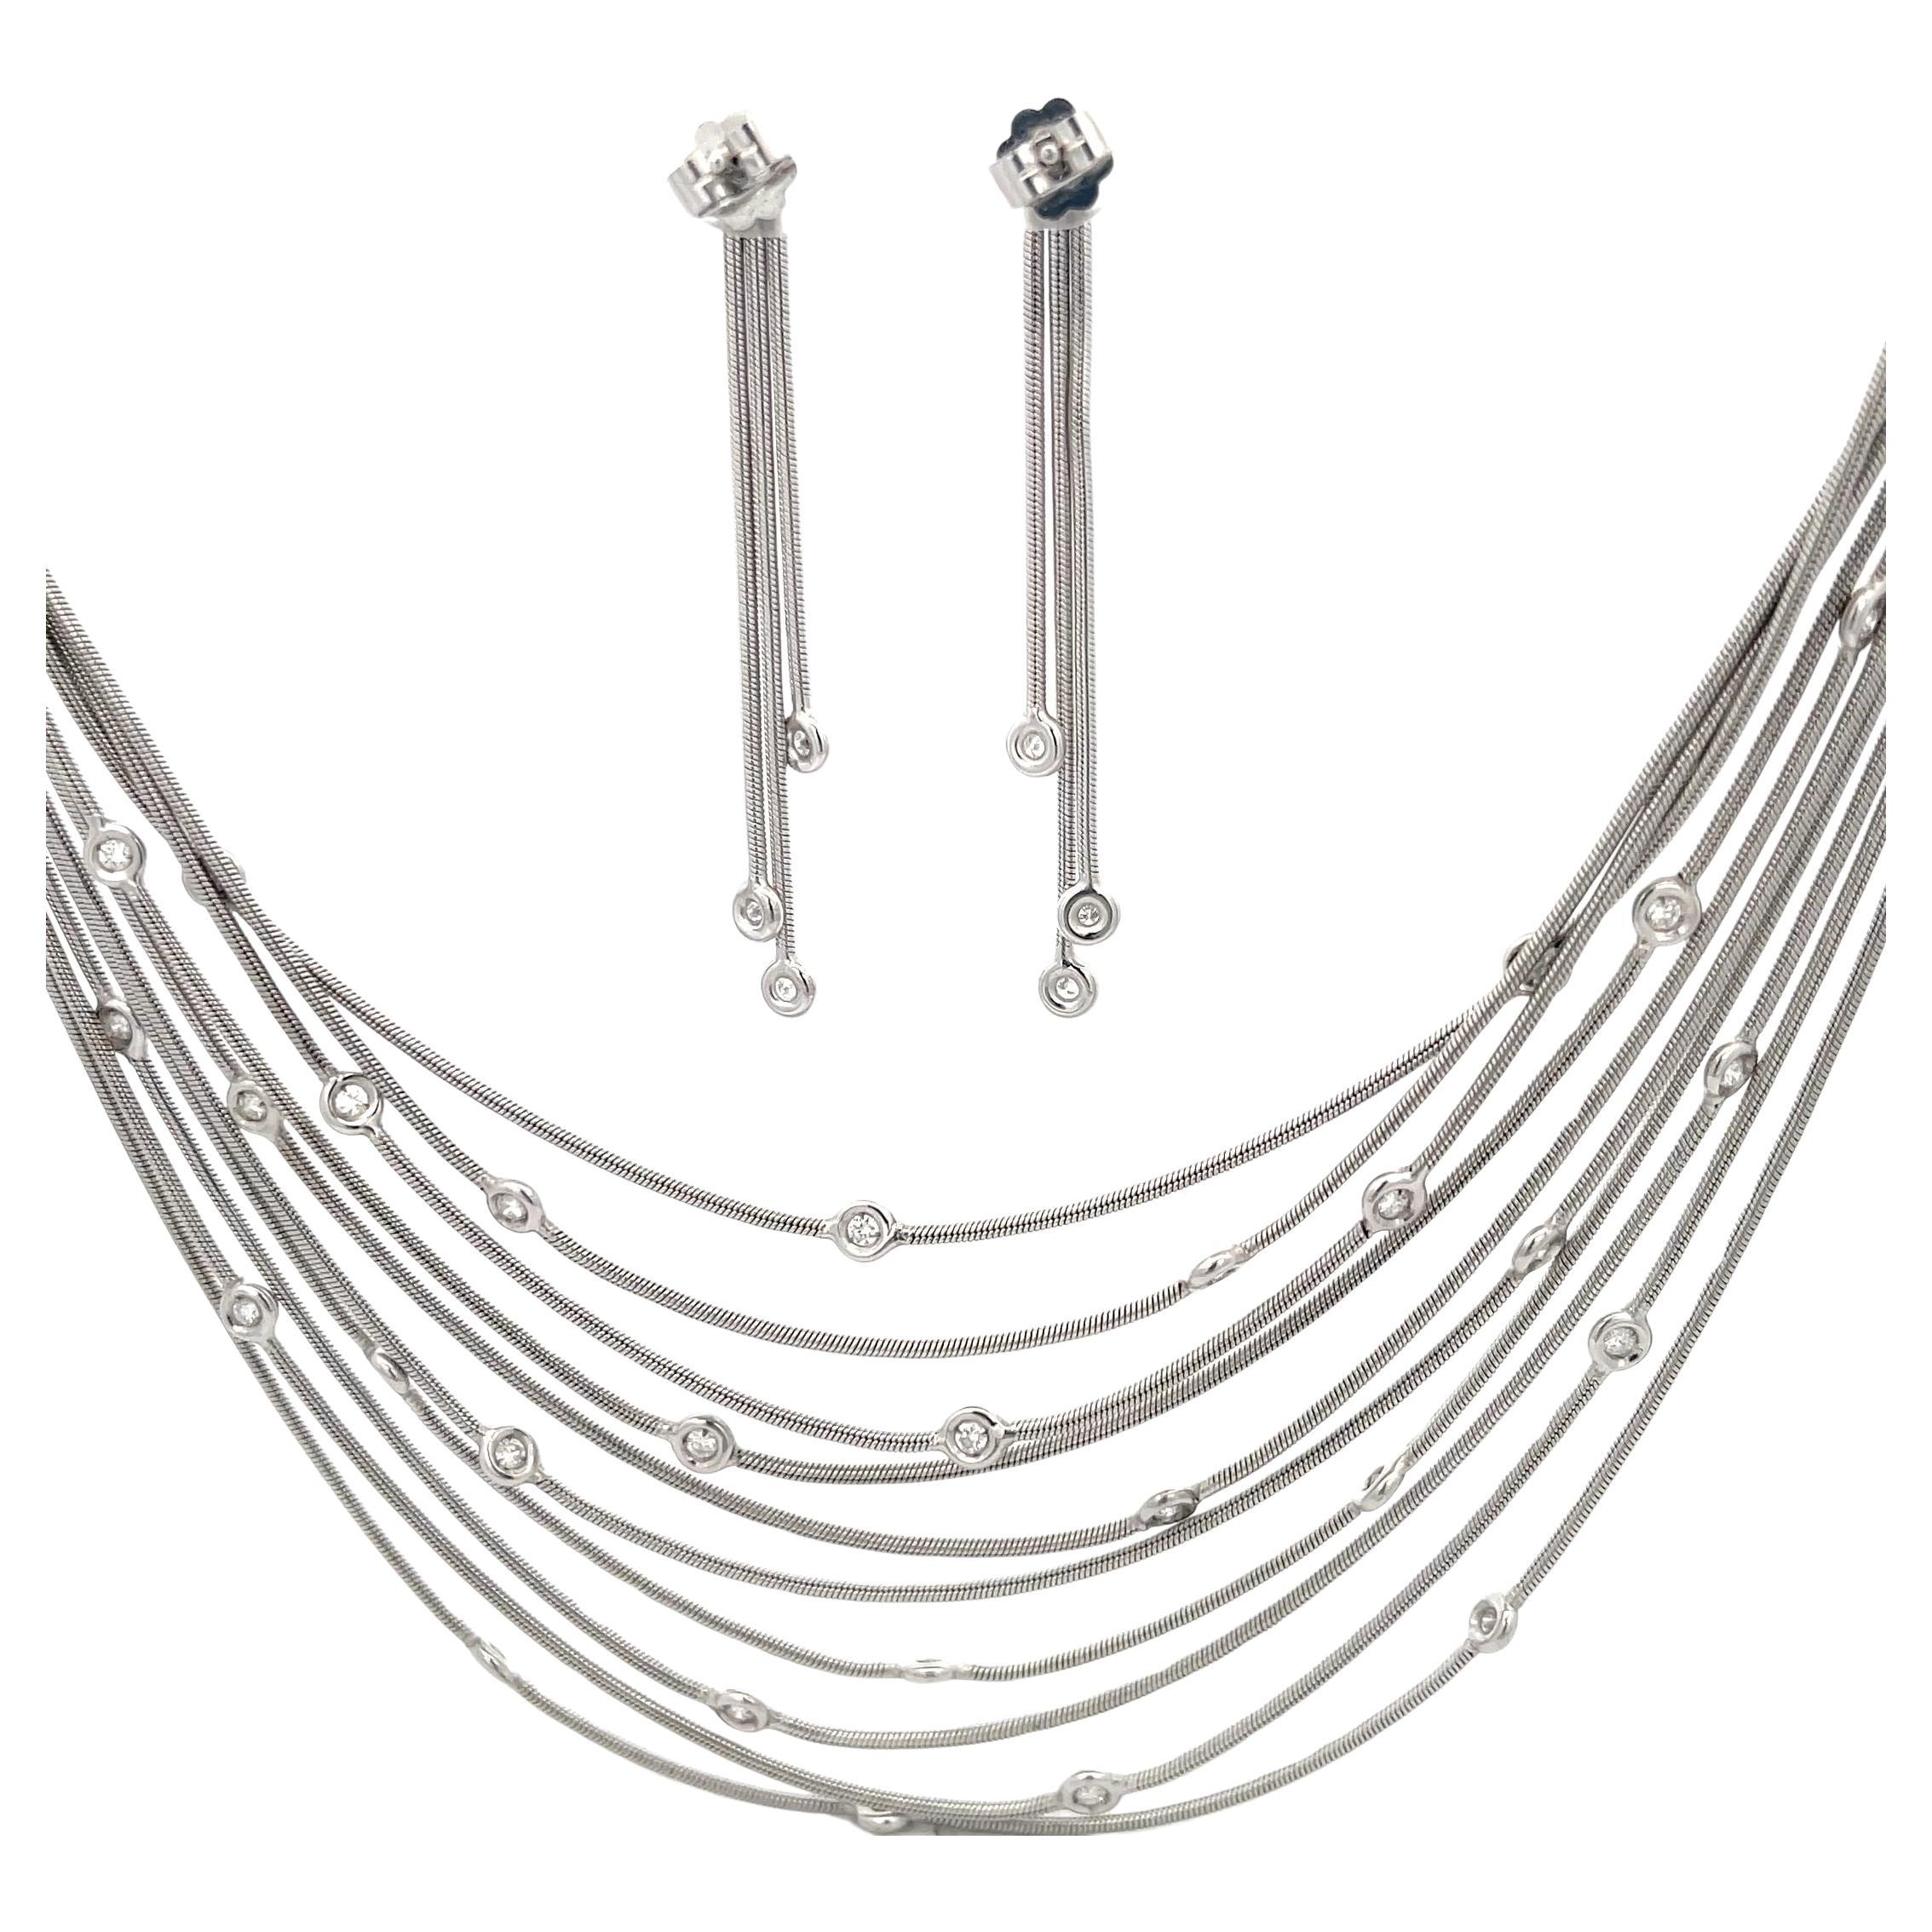 H Stern 18K White Gold Multistrand Necklace with Diamonds, Plus Earrings Set 
Necklace - 15 1/2